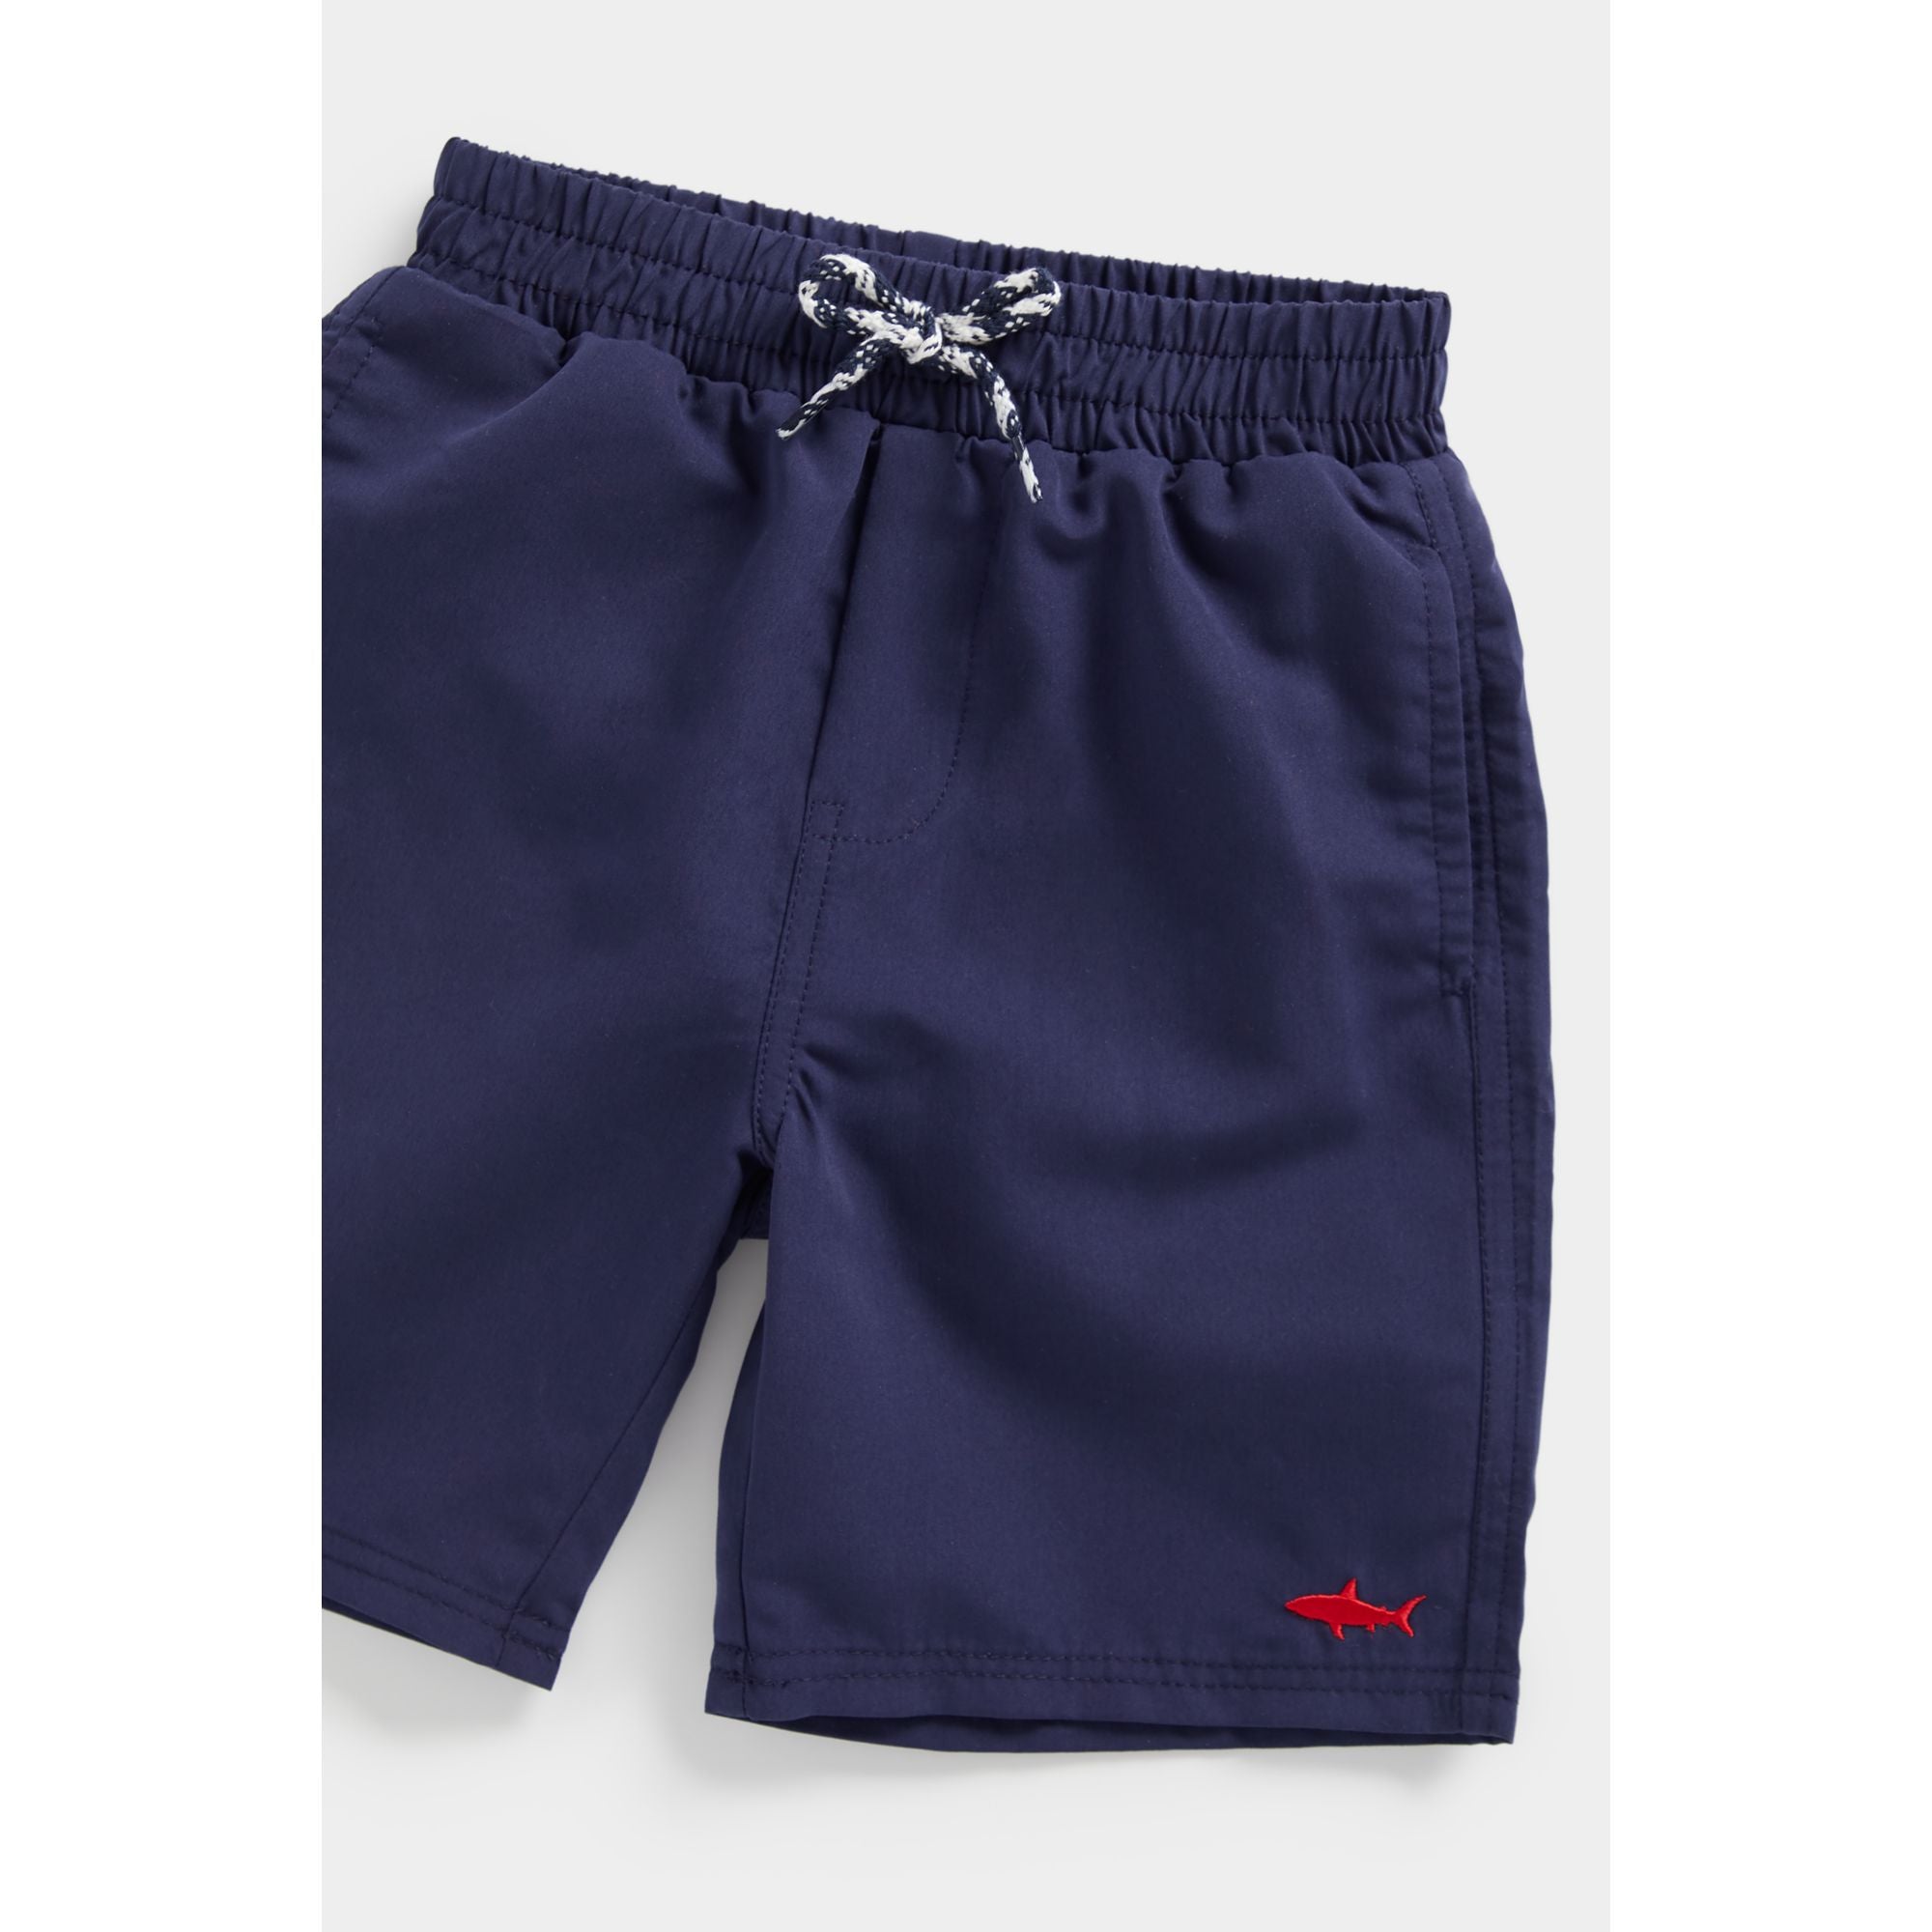 Mothercare Red and Navy Board Shorts - 2 Pack